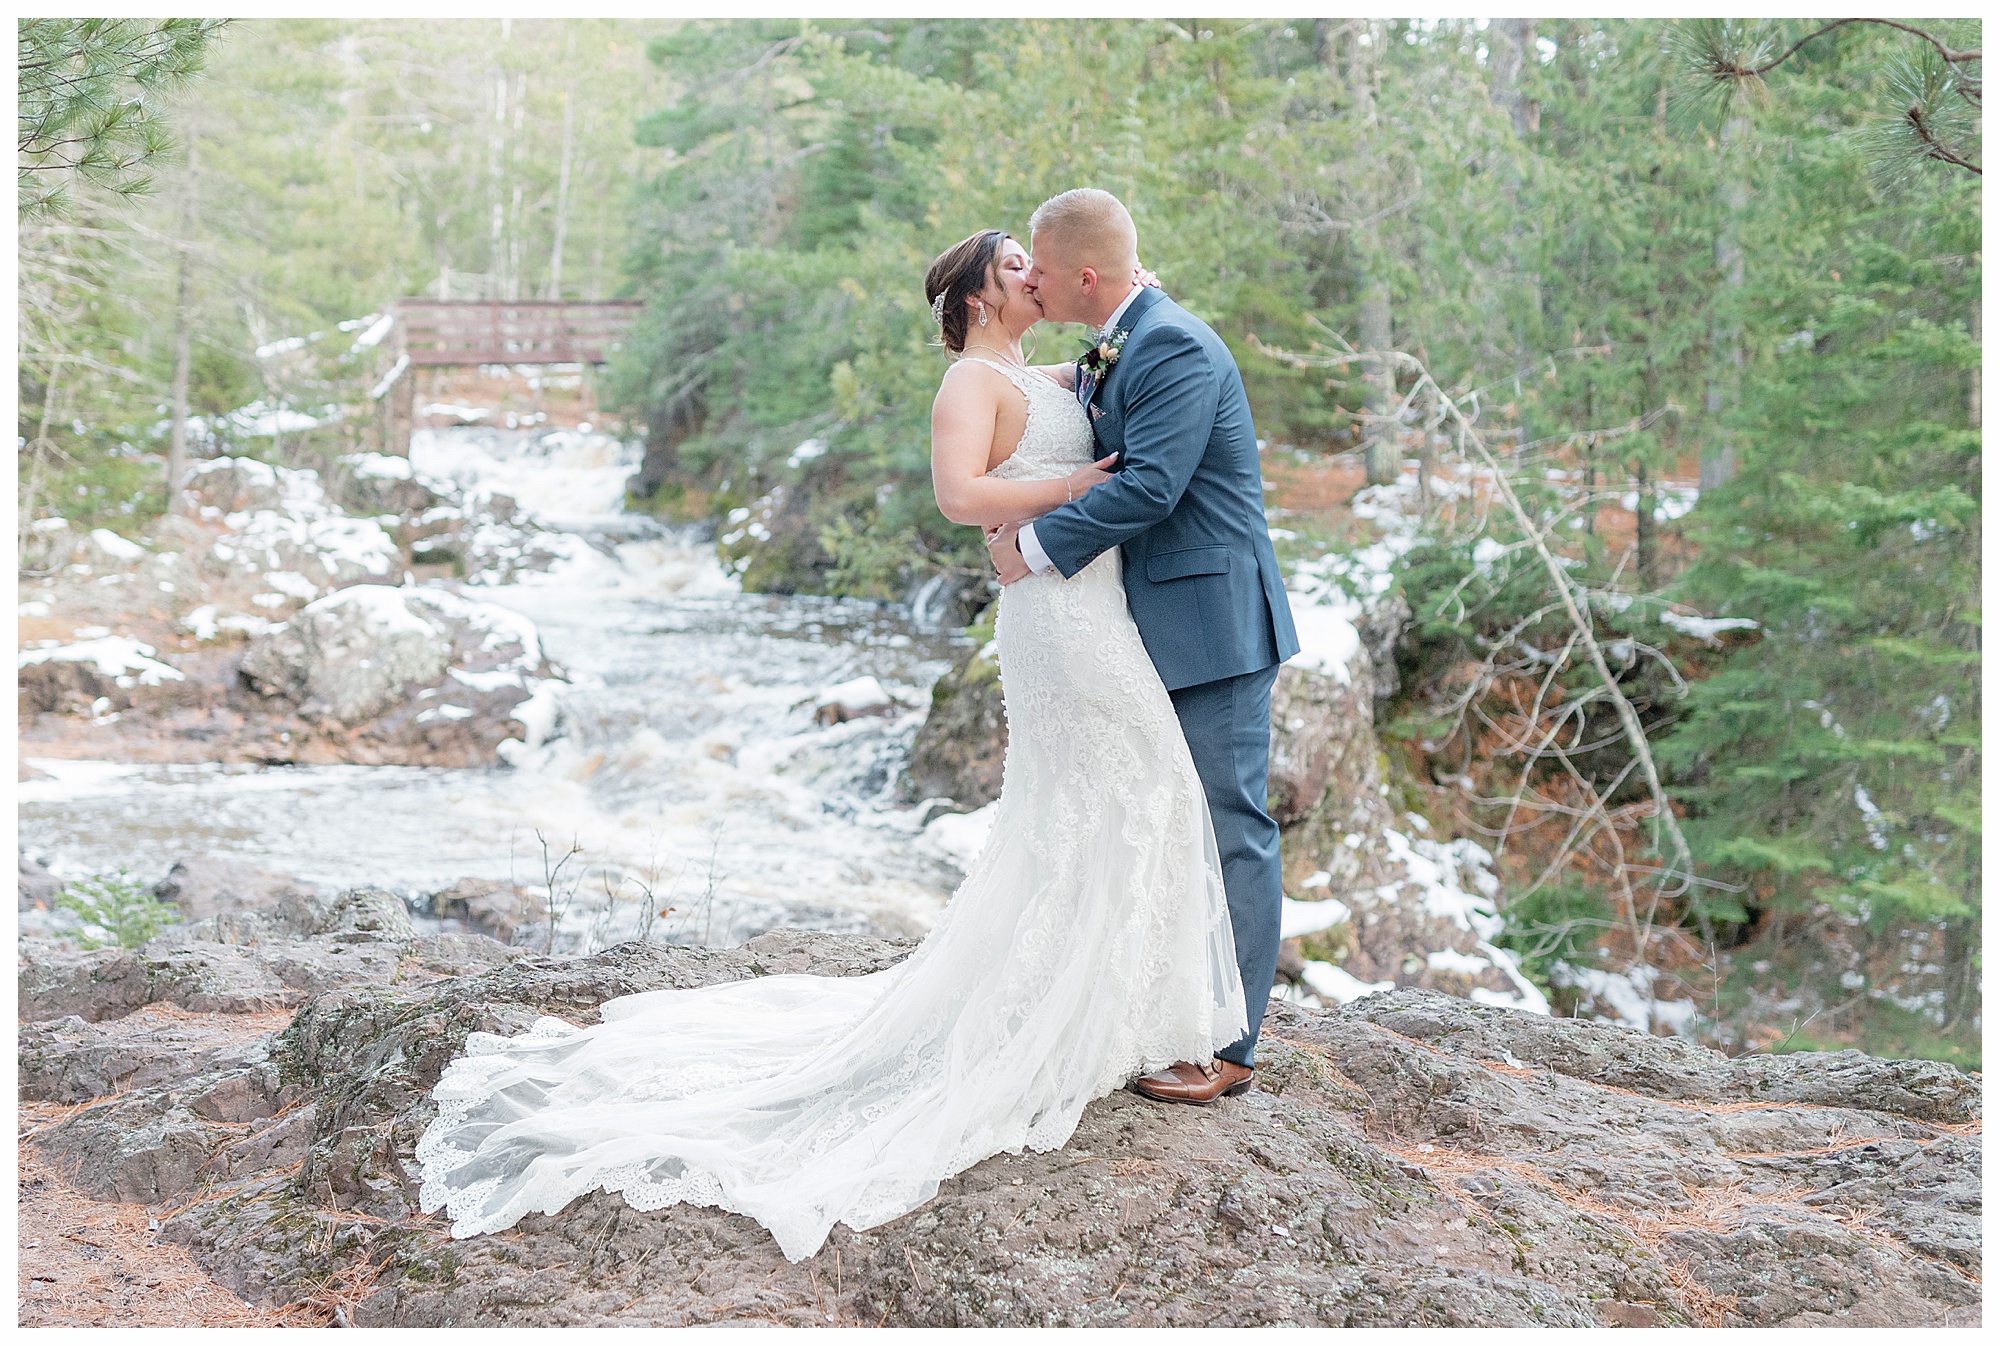 A Wisconsin waterfall state park adventure elopement. Photography by Kayla Lee.